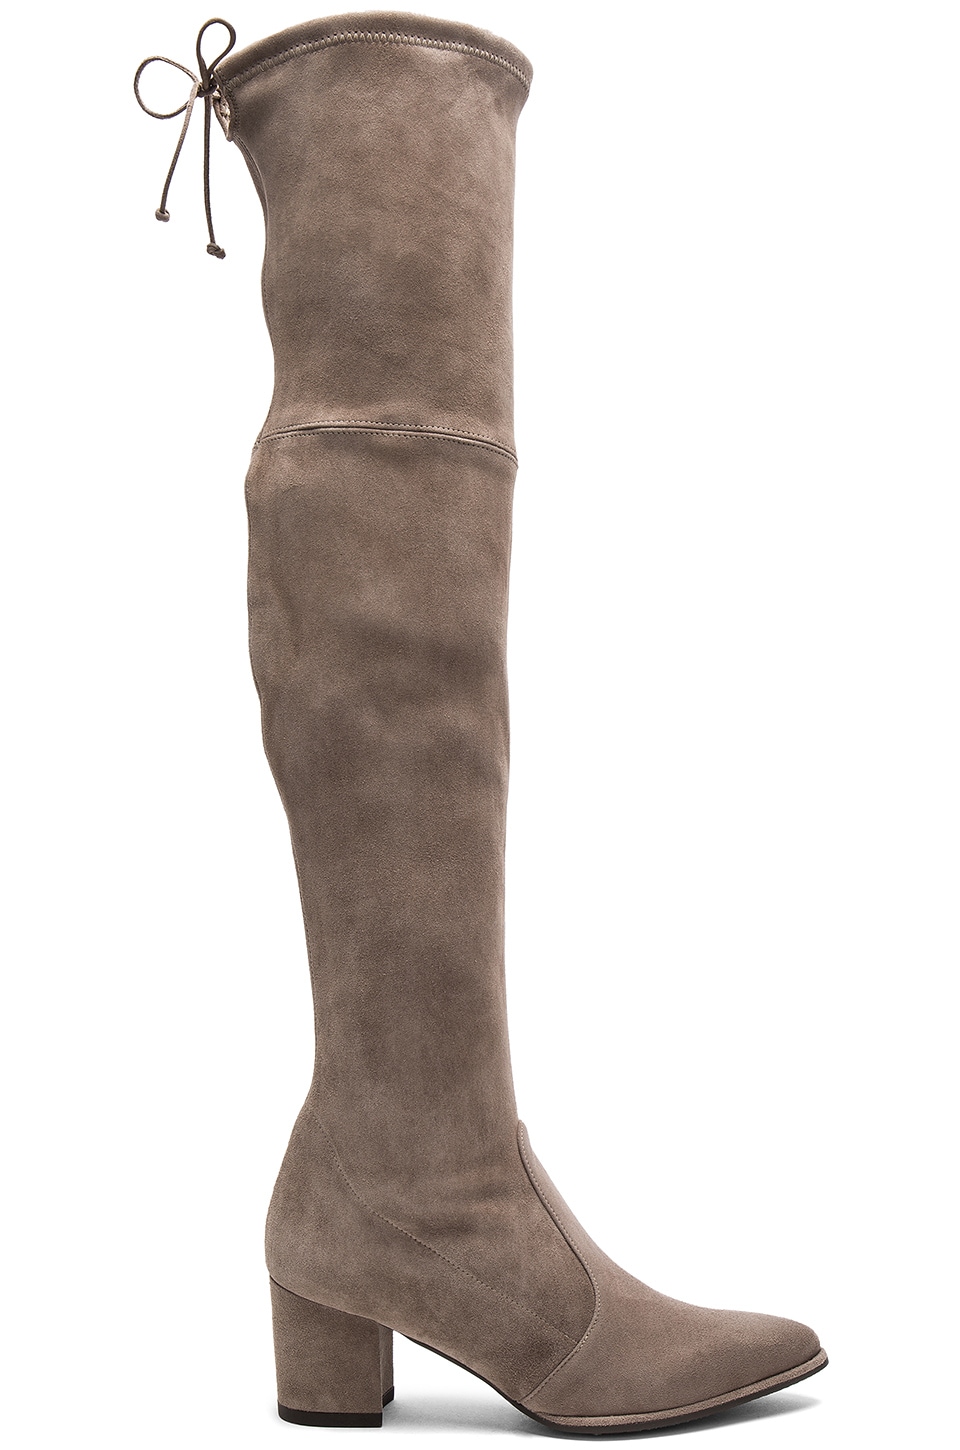 Stuart Weitzman Thighland Boot in Taupe 